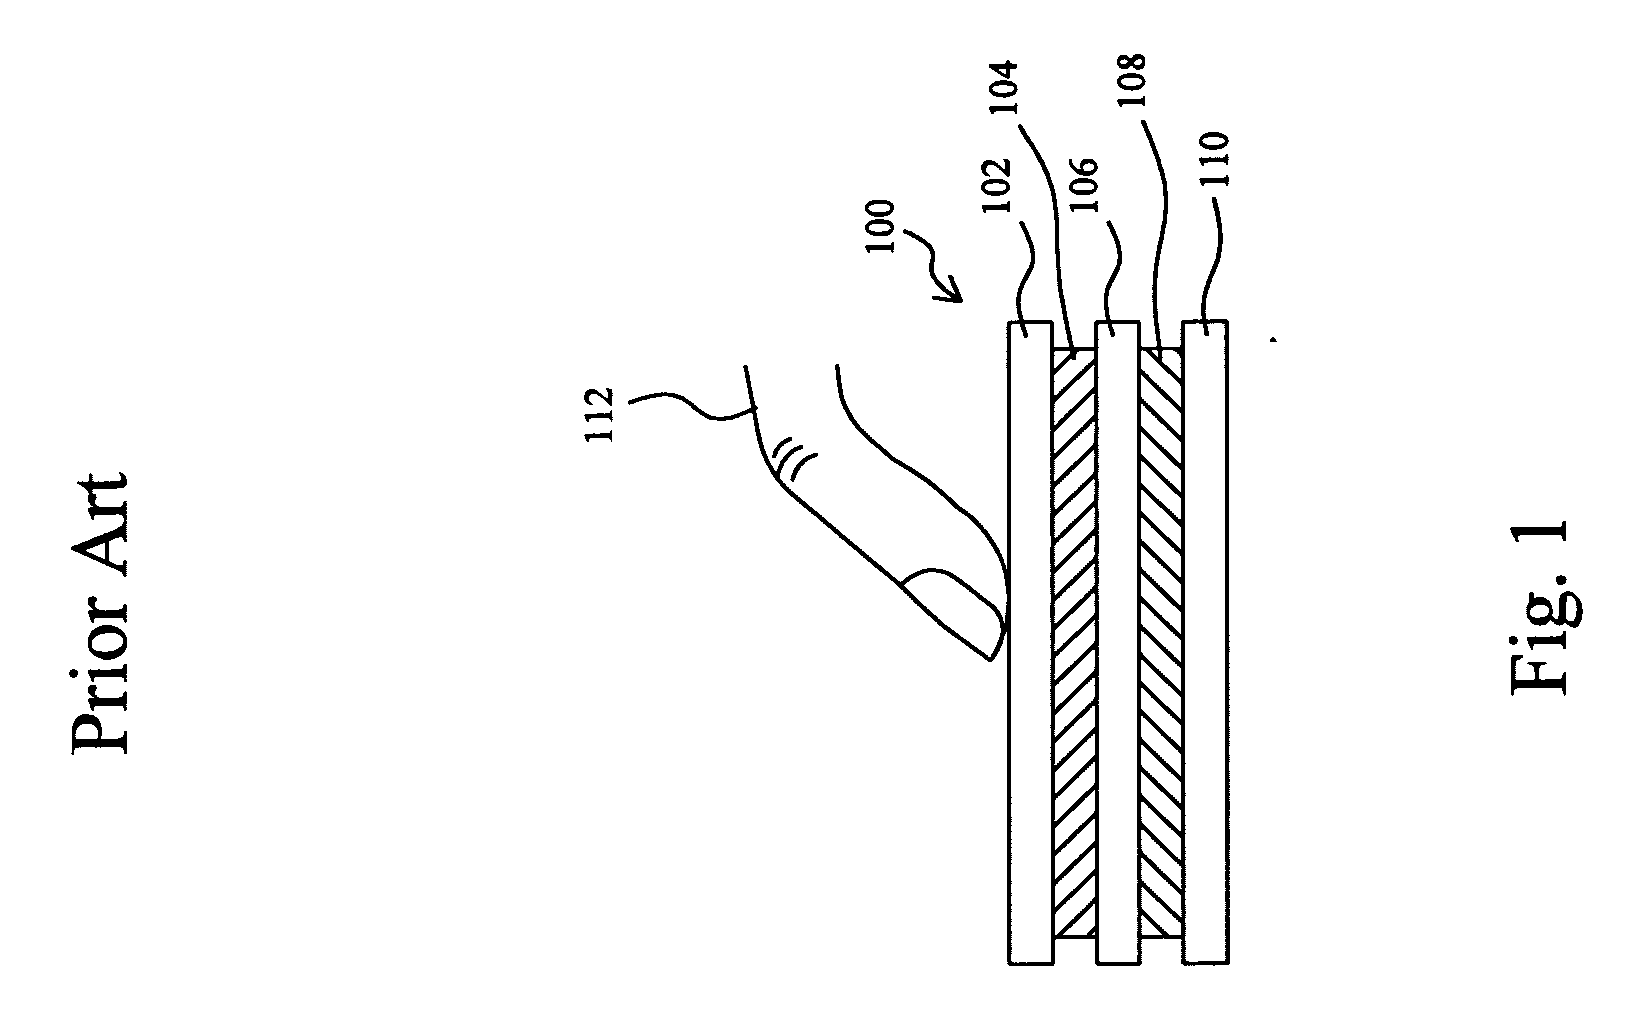 Method for gesture detection on a capacitive touchpad